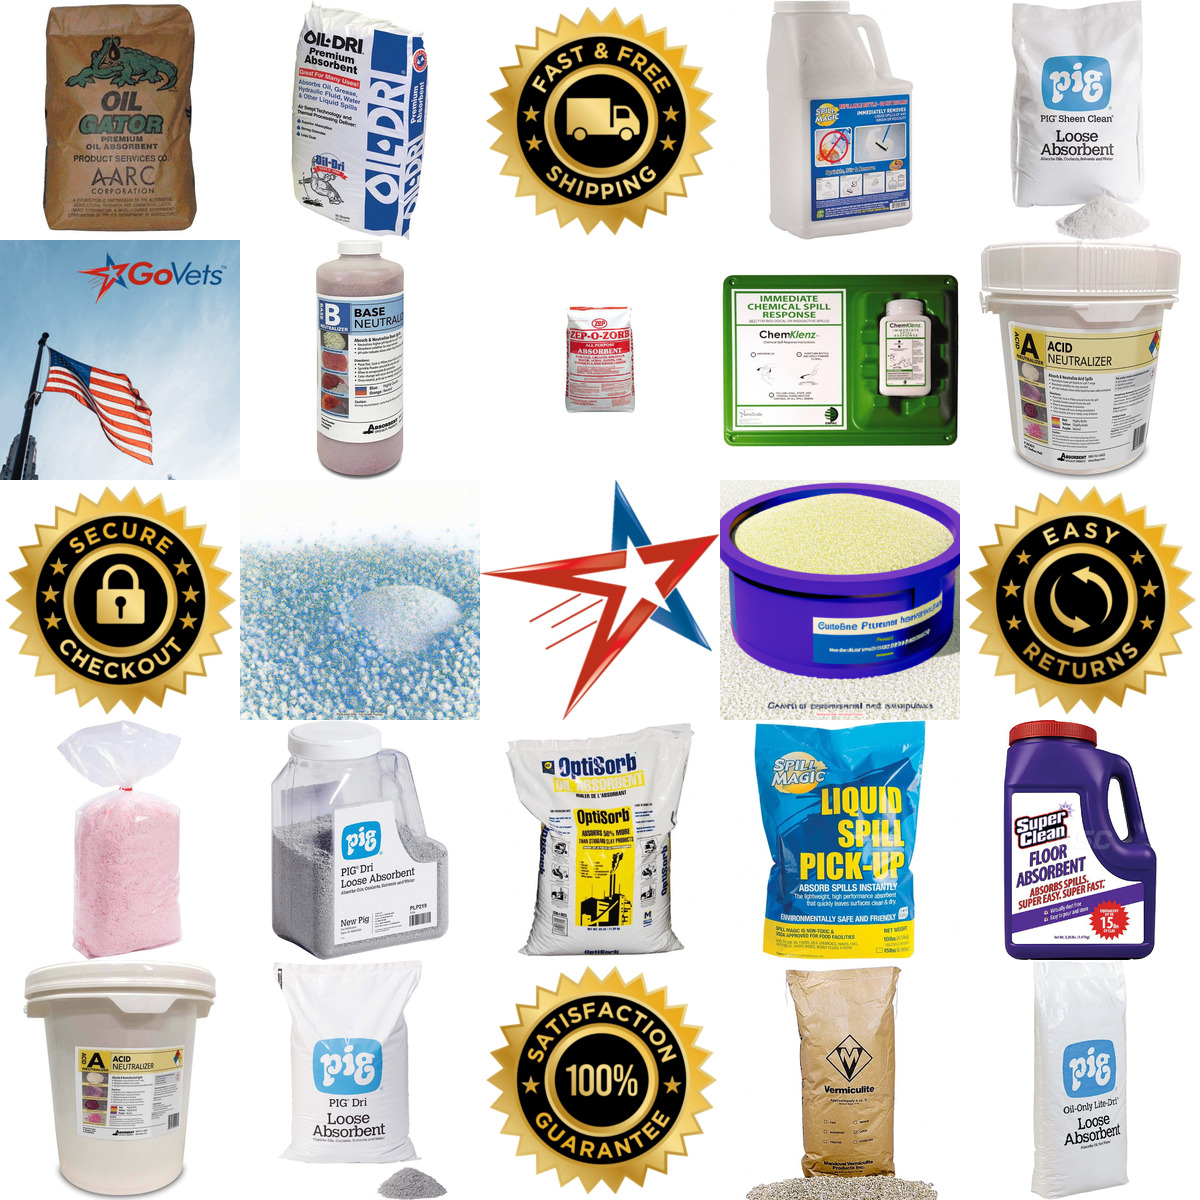 A selection of Granular Sorbents Absorbents products on GoVets